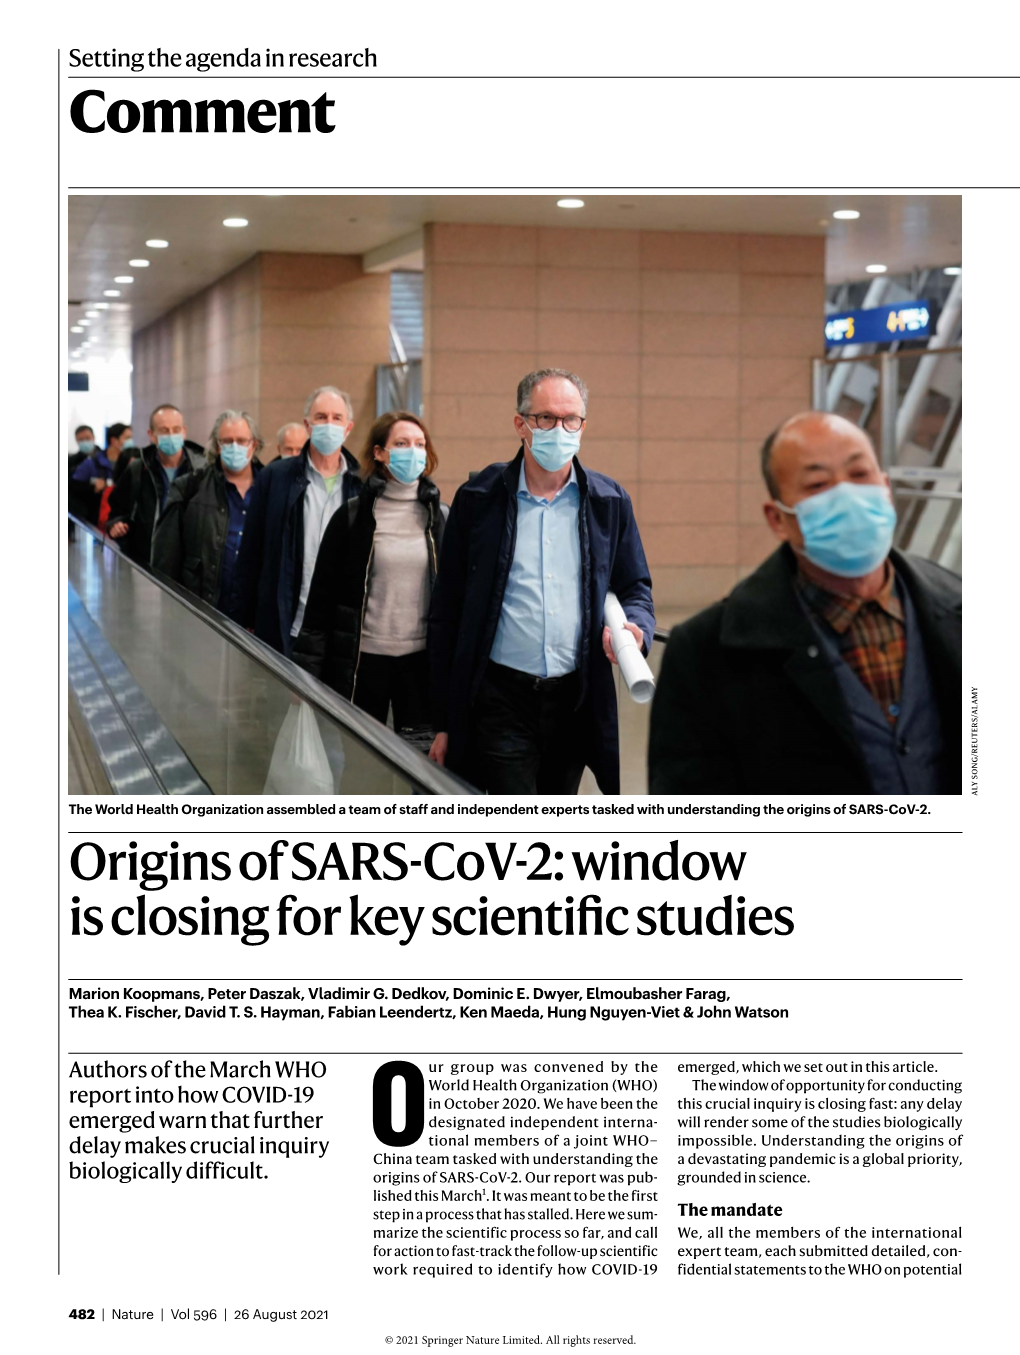 Comment ALY SONG/REUTERS/ALAMY ALY the World Health Organization Assembled a Team of Staff and Independent Experts Tasked with Understanding the Origins of SARS-Cov-2